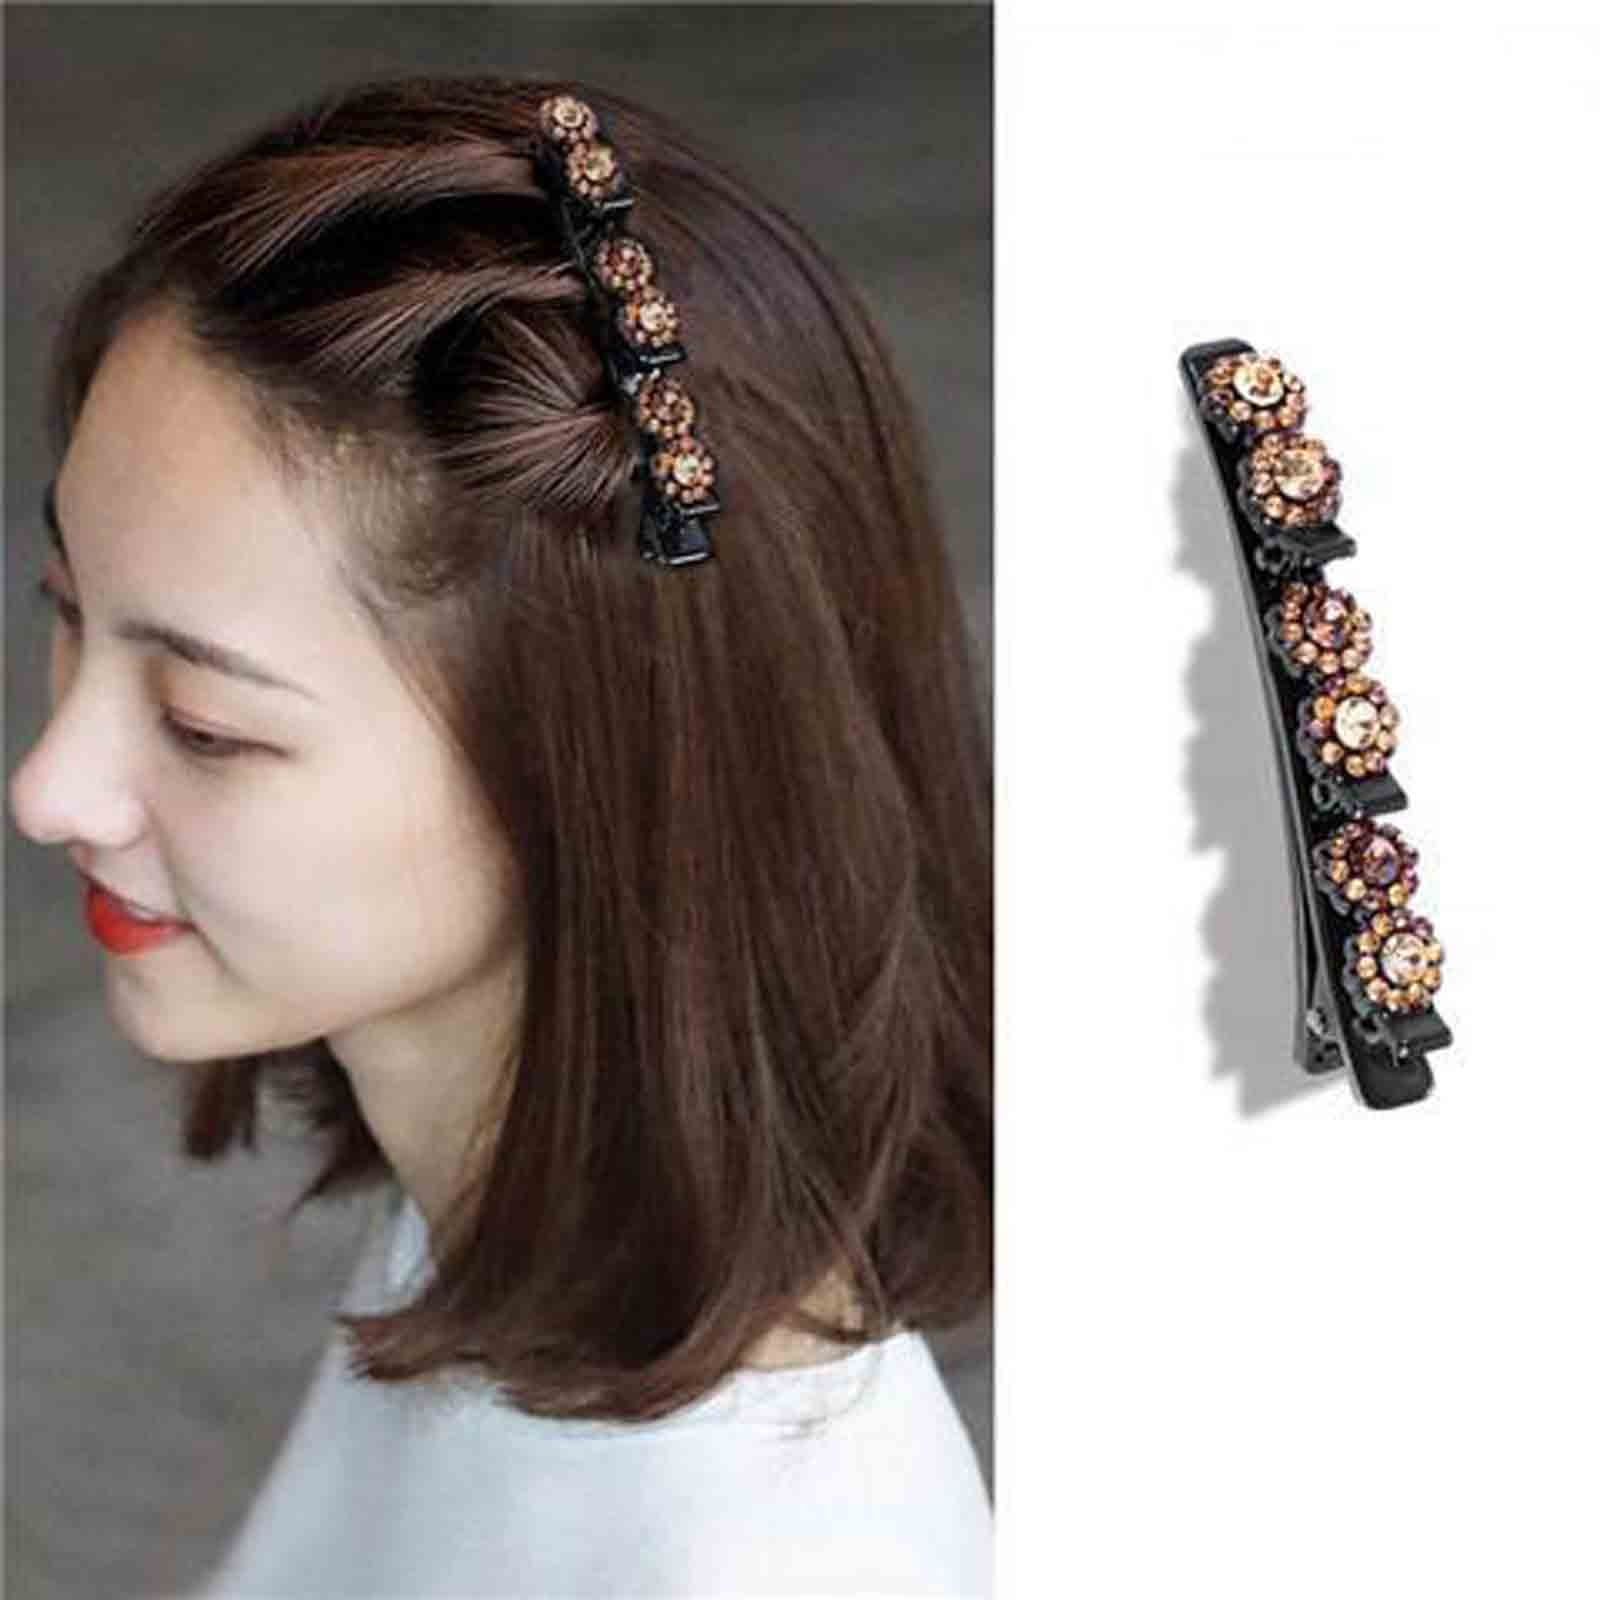 Pompotops 3 PCS Braided Hair Clips with 3 Small Clips for Women Girls Cute  Pearl Braided Hair Barrettes Hair Accessories 